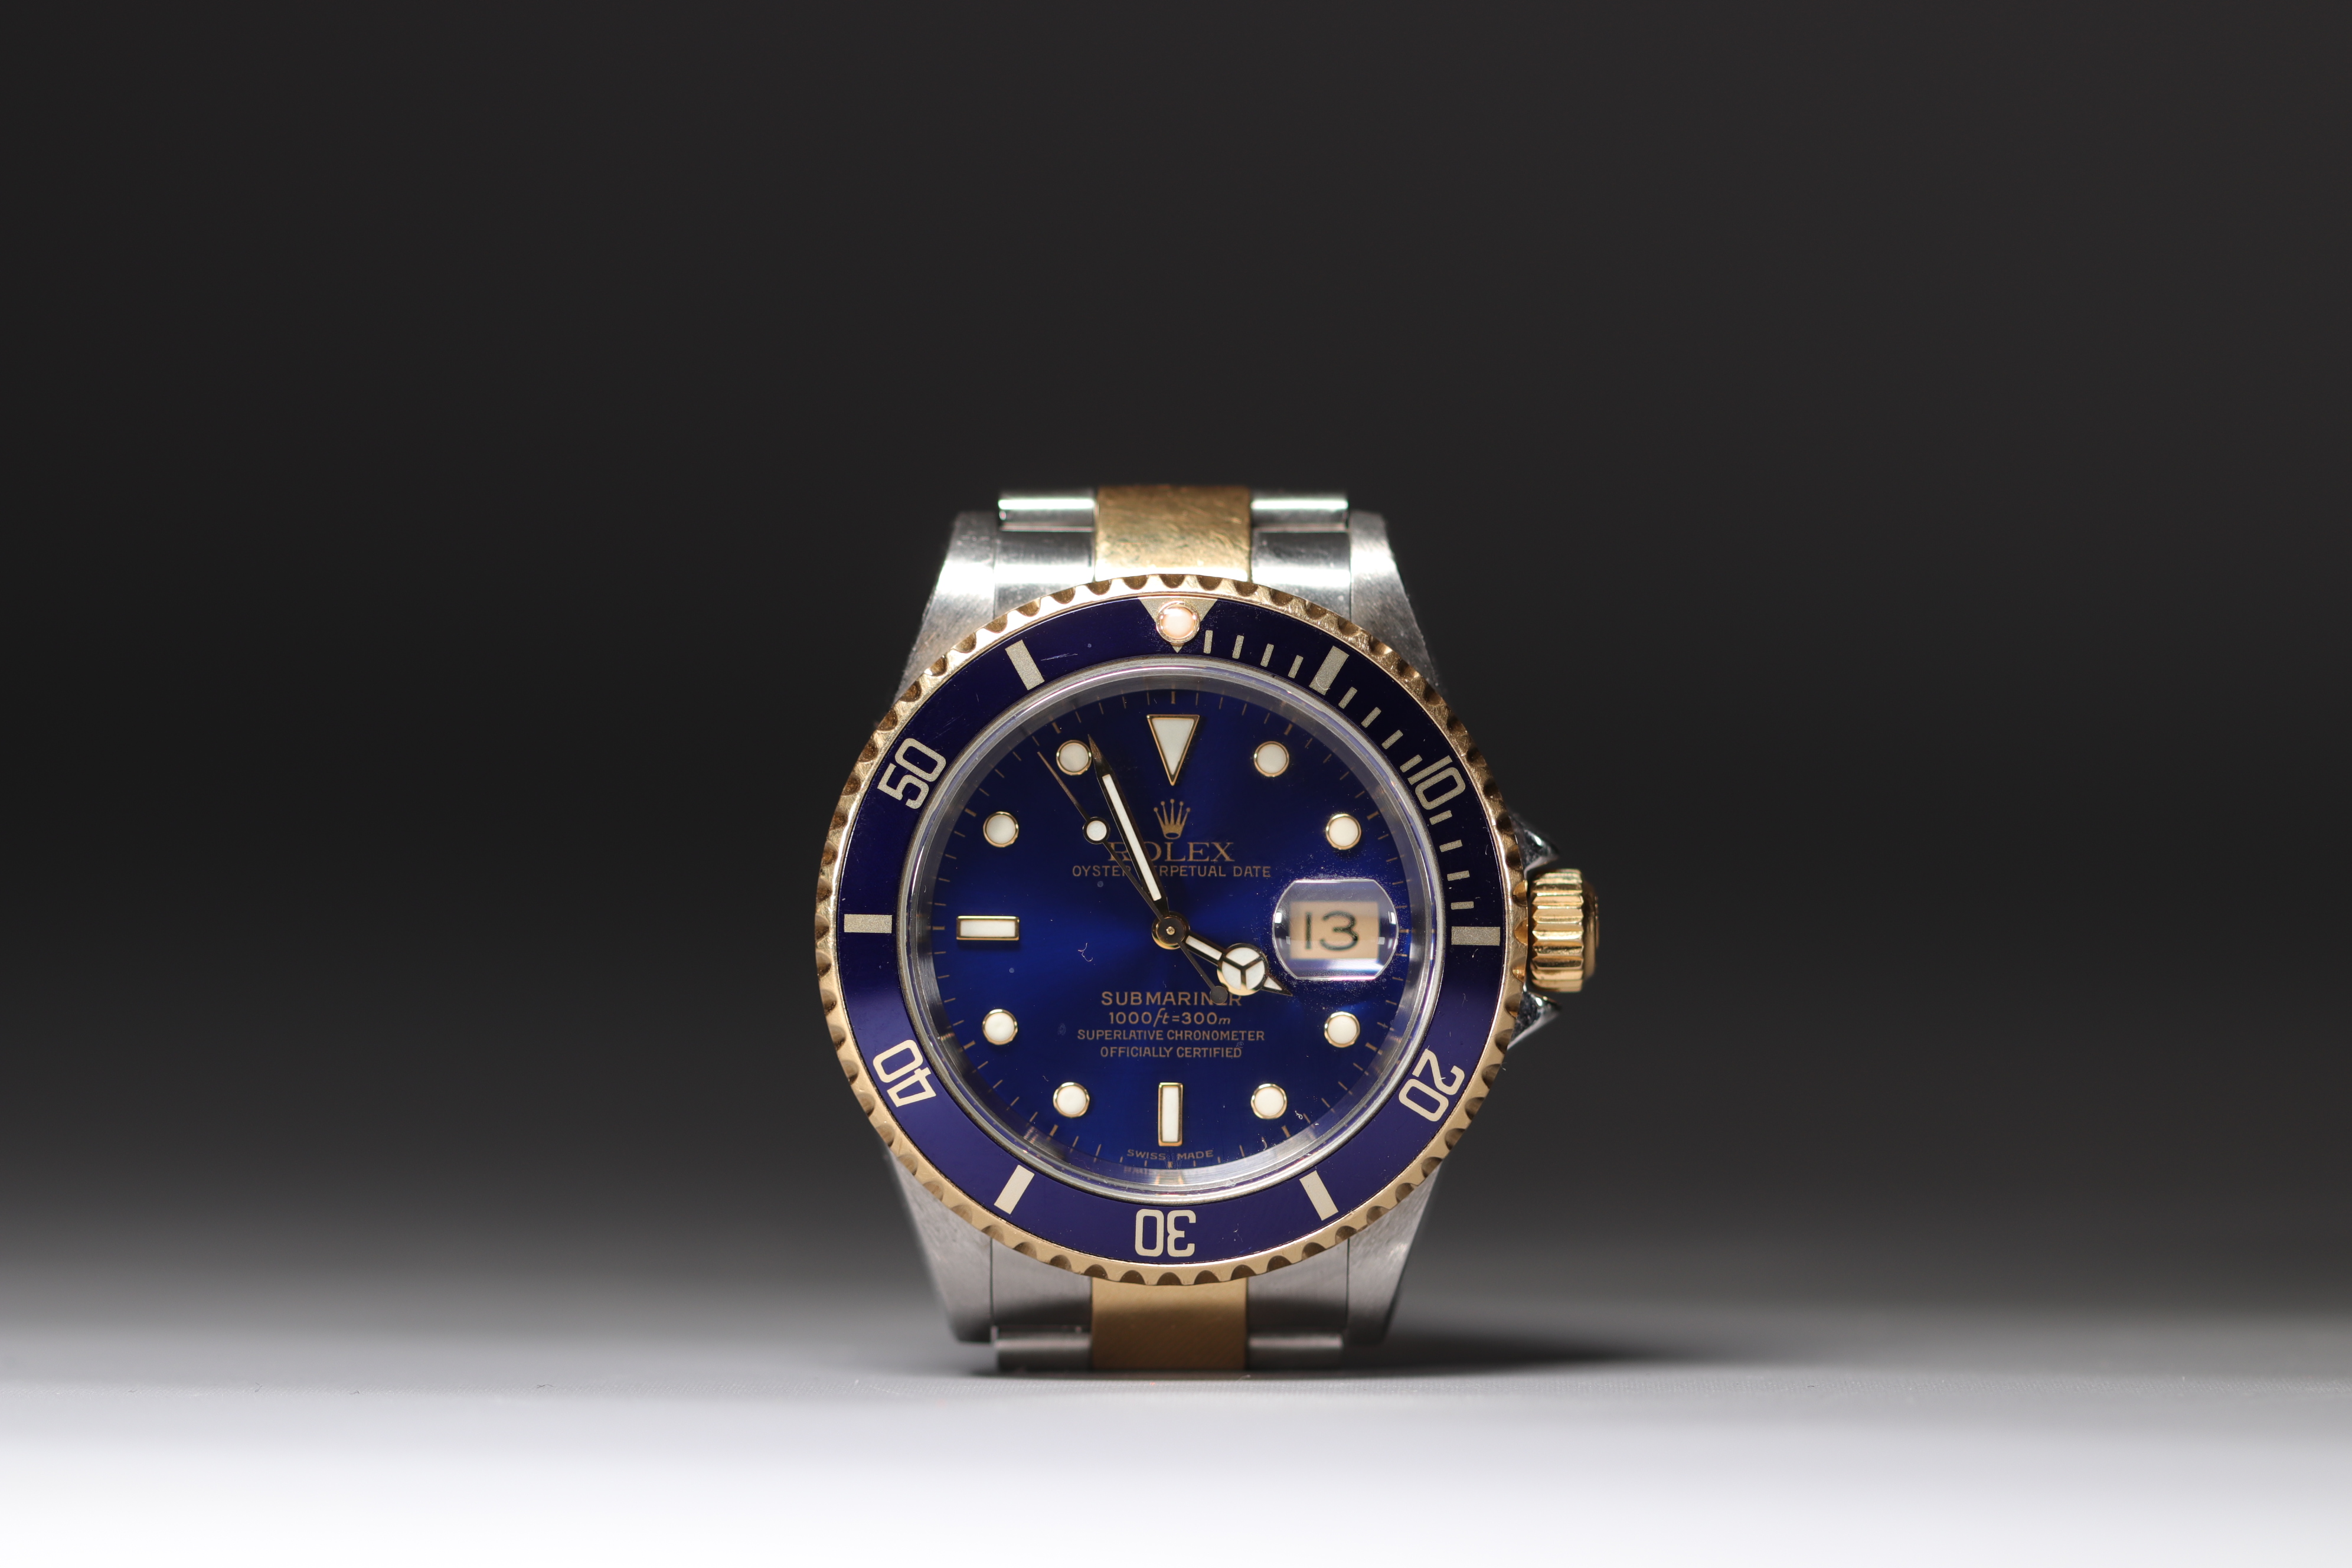 Rolex Submariner "Sultan" Oyster Perpetual Date 18k yellow gold and steel (16613) Full Set, year 200 - Image 2 of 3